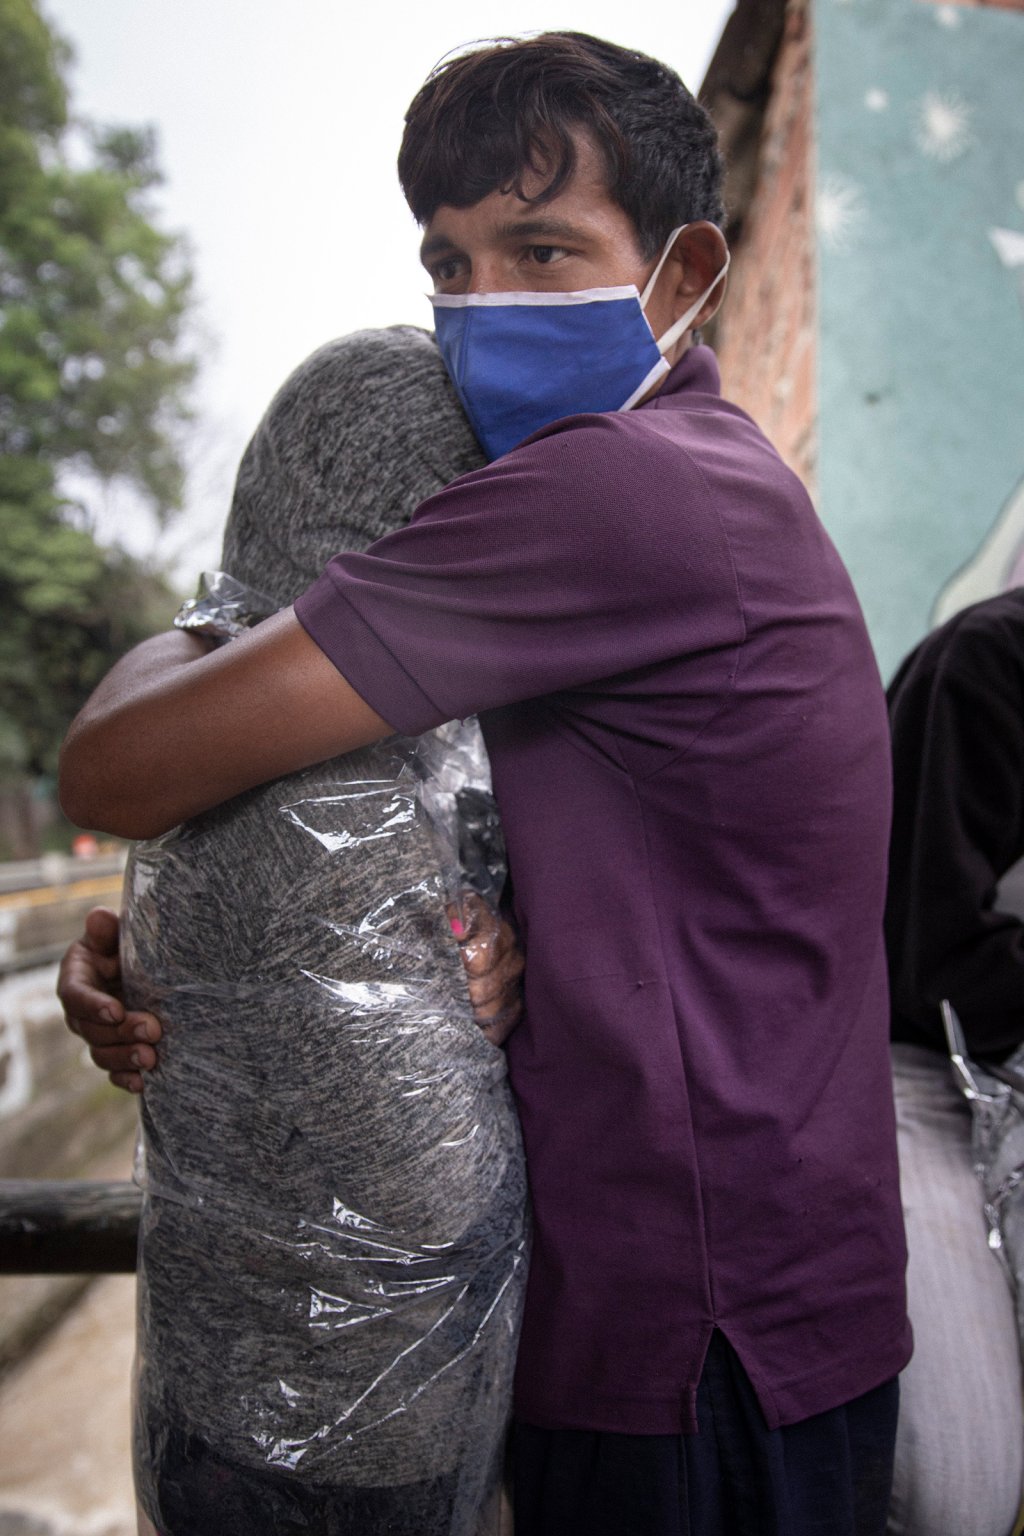 Johnmier Briceño and his girlfriend hug while taking cover from the rain in Pamplona, Colombia.